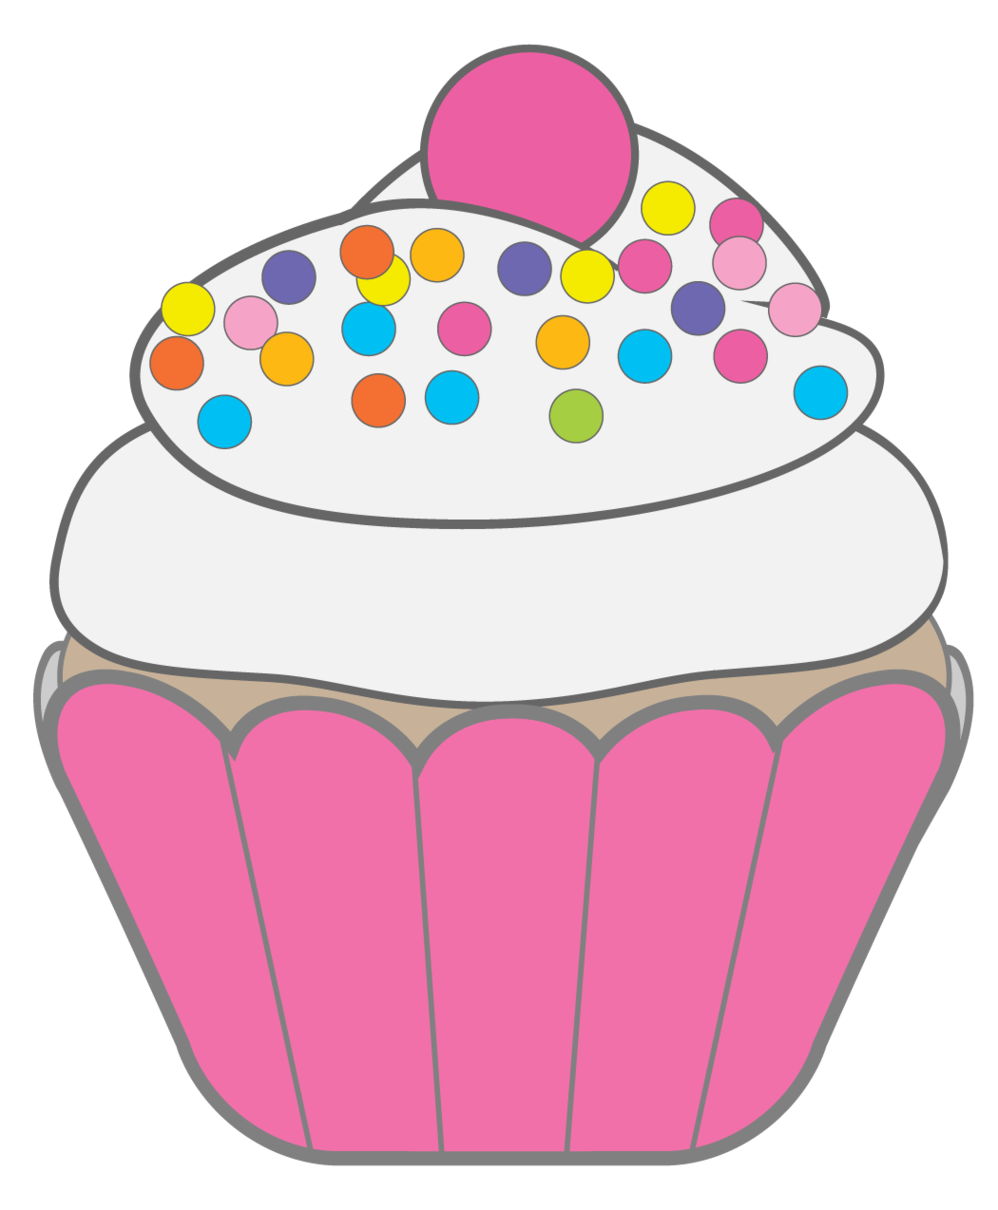 Cupcake Images Clip Art Clipart - Free to use Clip Art Resource